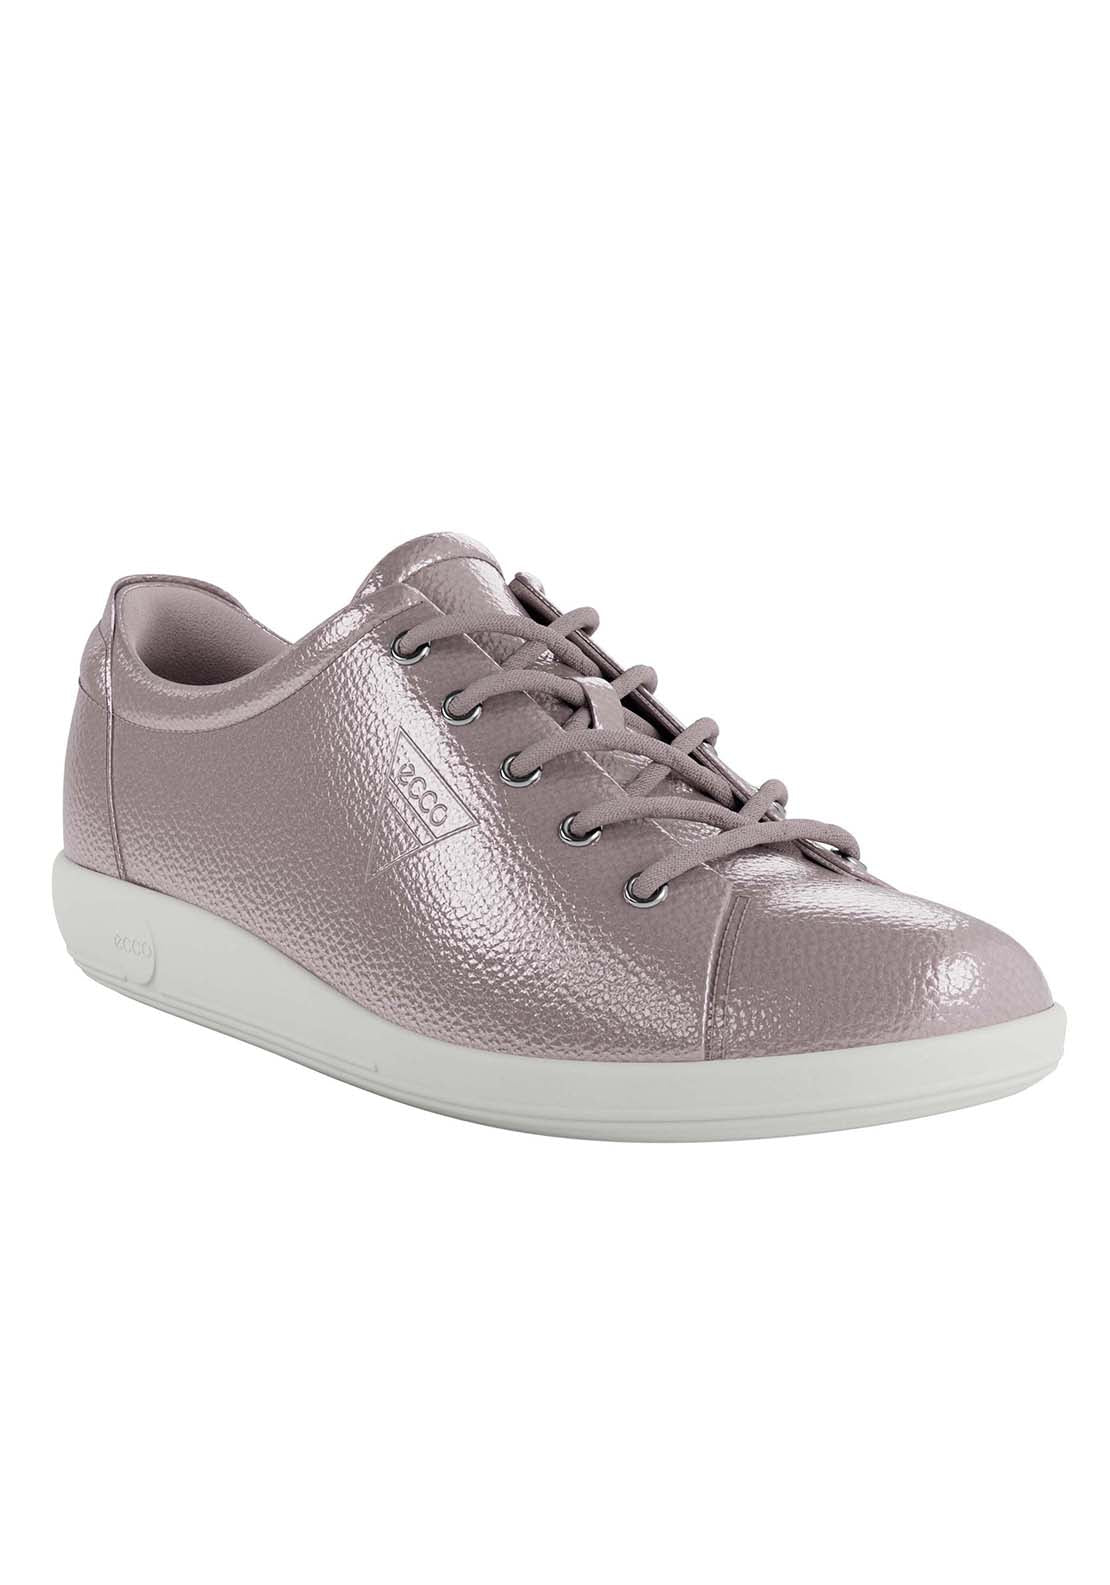 Ecco Soft 2 Casual Shoe 1 Shaws Department Stores